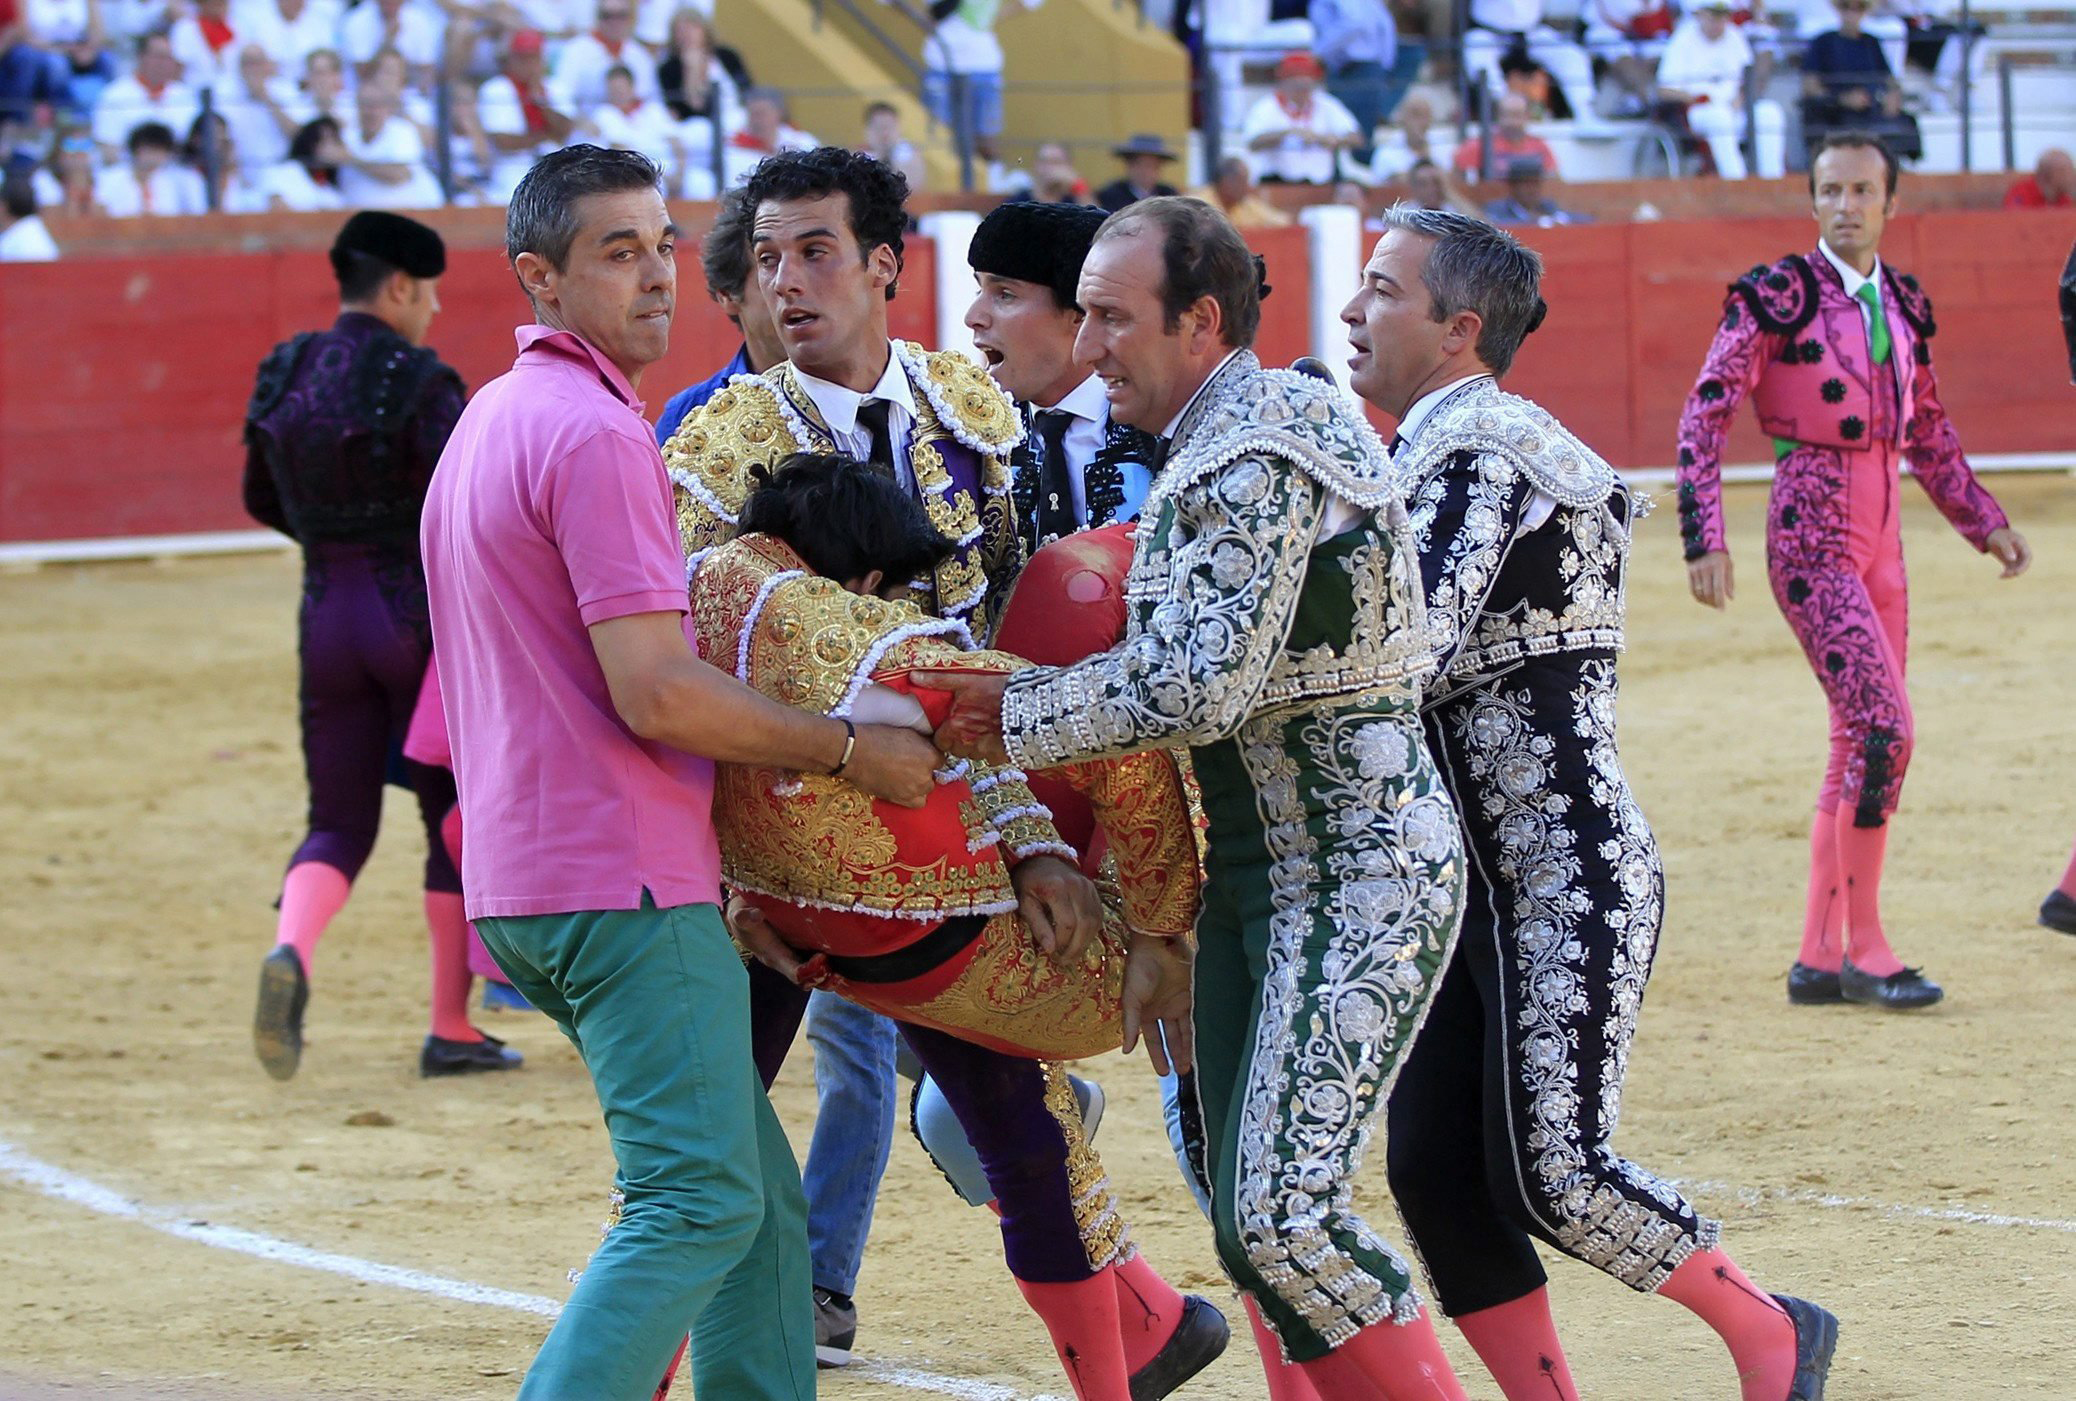 Spanish bullfighter Victor Barrio, 29, is carried out from the bullring after being gored during a bullfight held on the occasion of Feria del Angel in Teruel, Aragon, July 9, 2016. (Antonio Garcia—EPA)